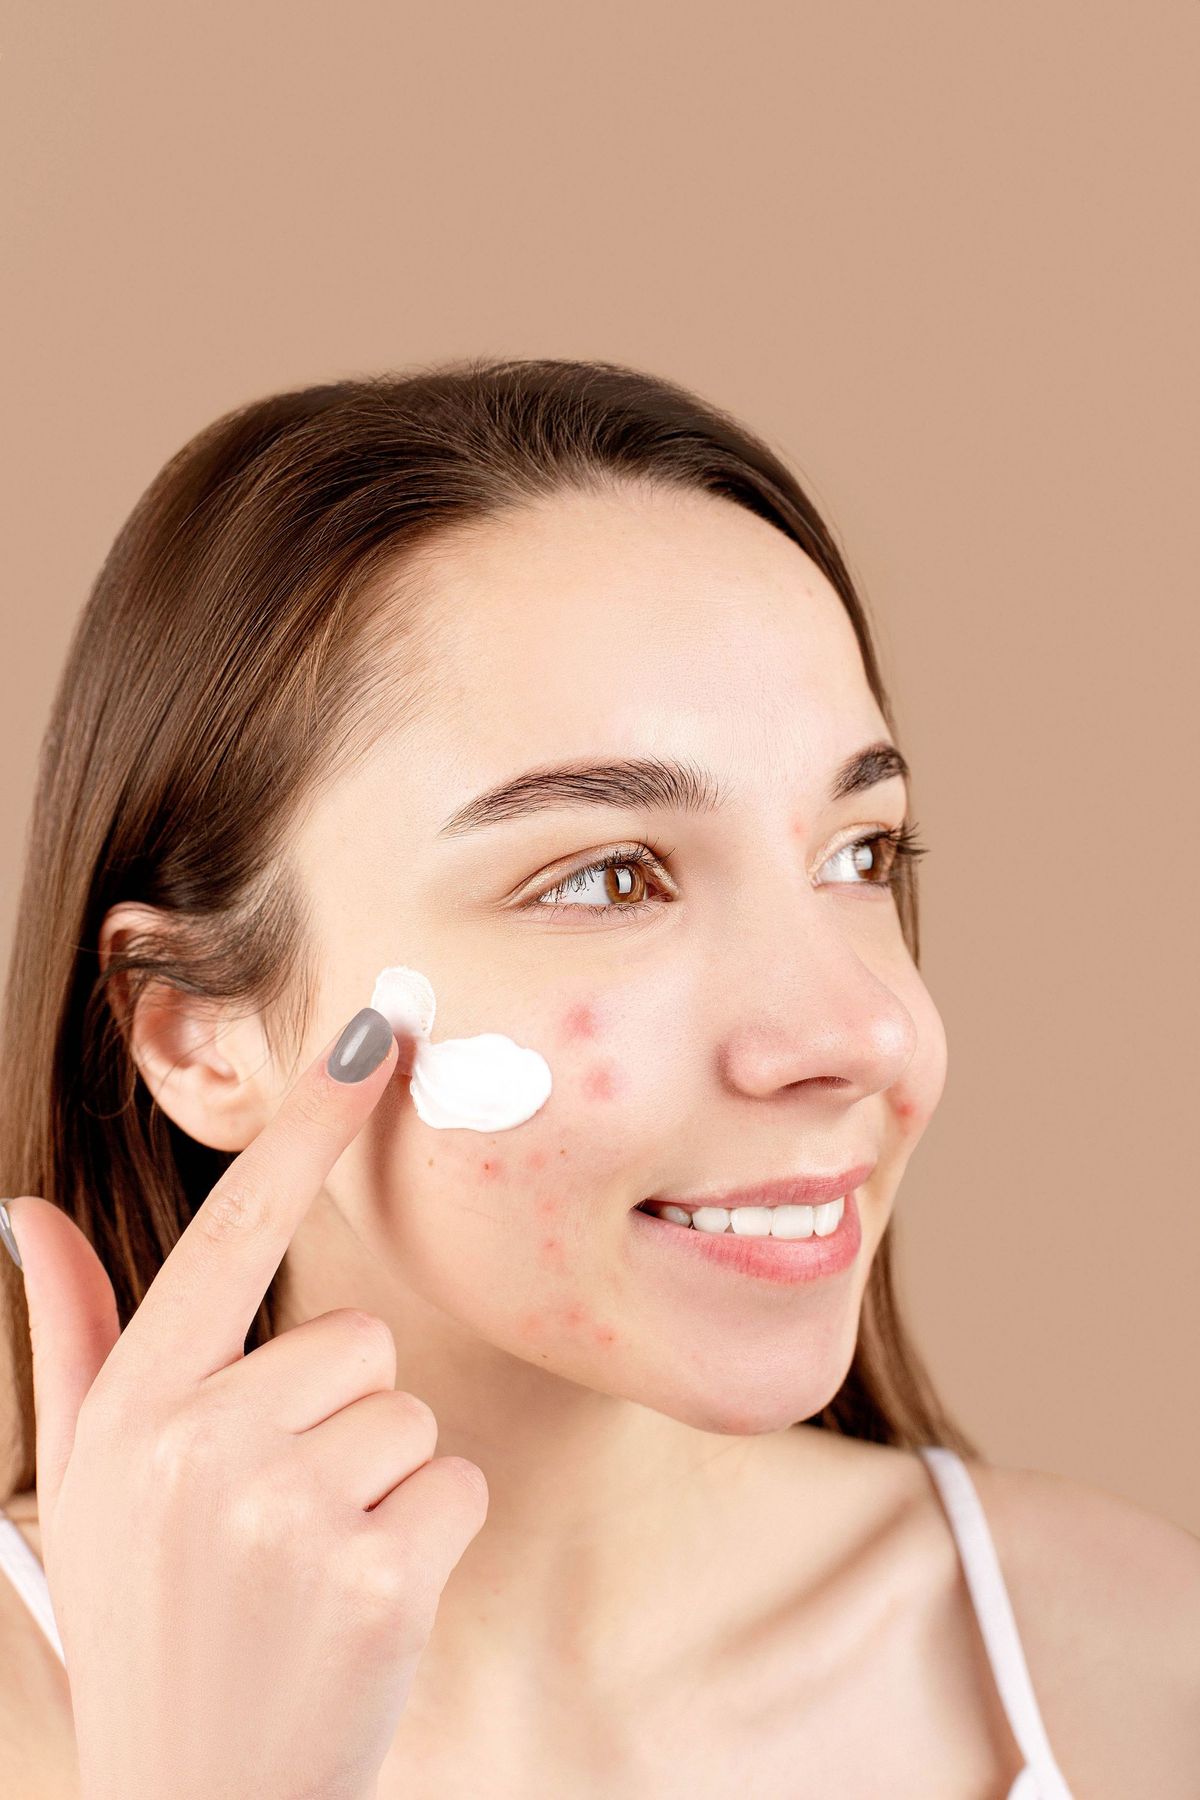 What's The Best Probiotic for Acne? We'll Tell You!